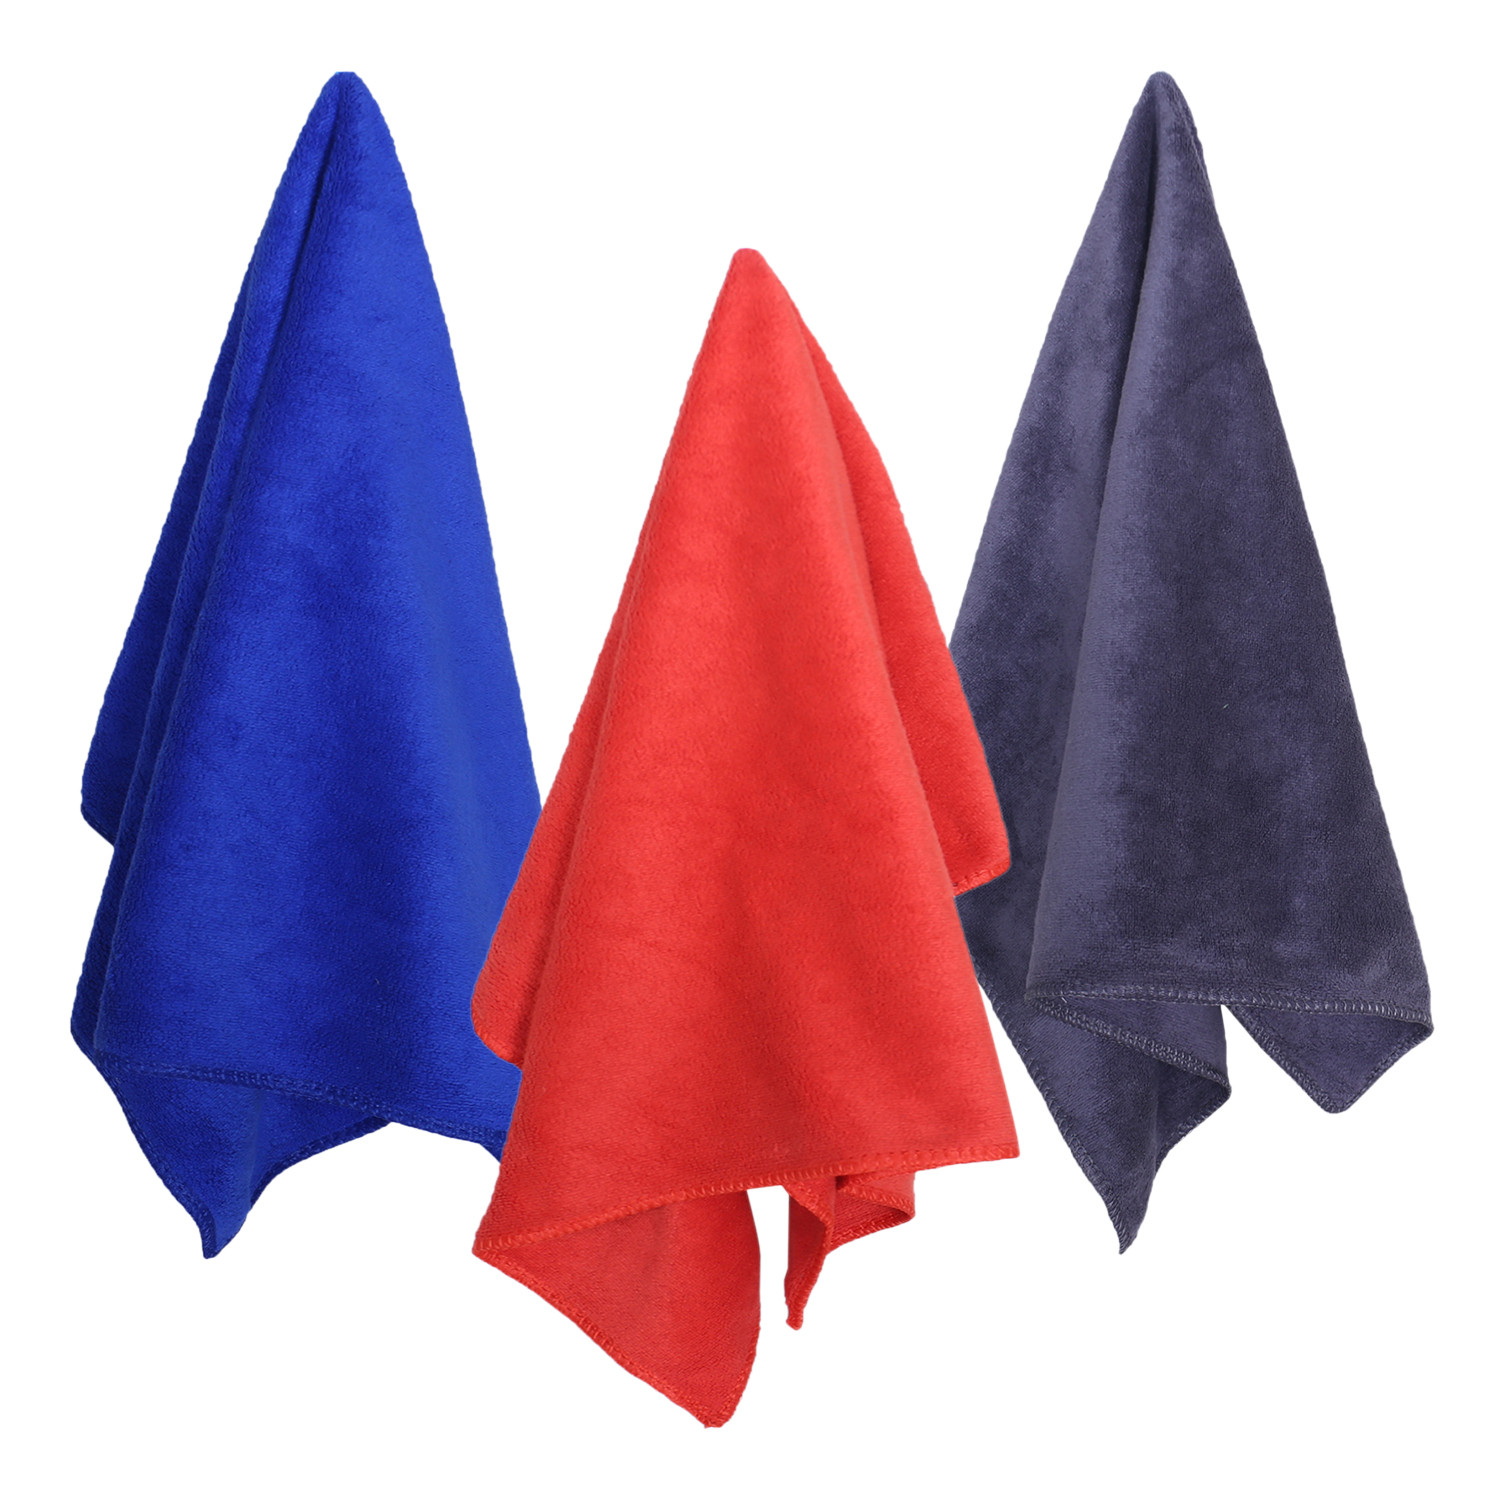 Kuber Industries Cleaning Cloths|Microfiber Highly Absorbent Wash Towels for Kitchen,Car,Window,24 x 16 Inch,Pack of 3 (Red,Blue & Gray)